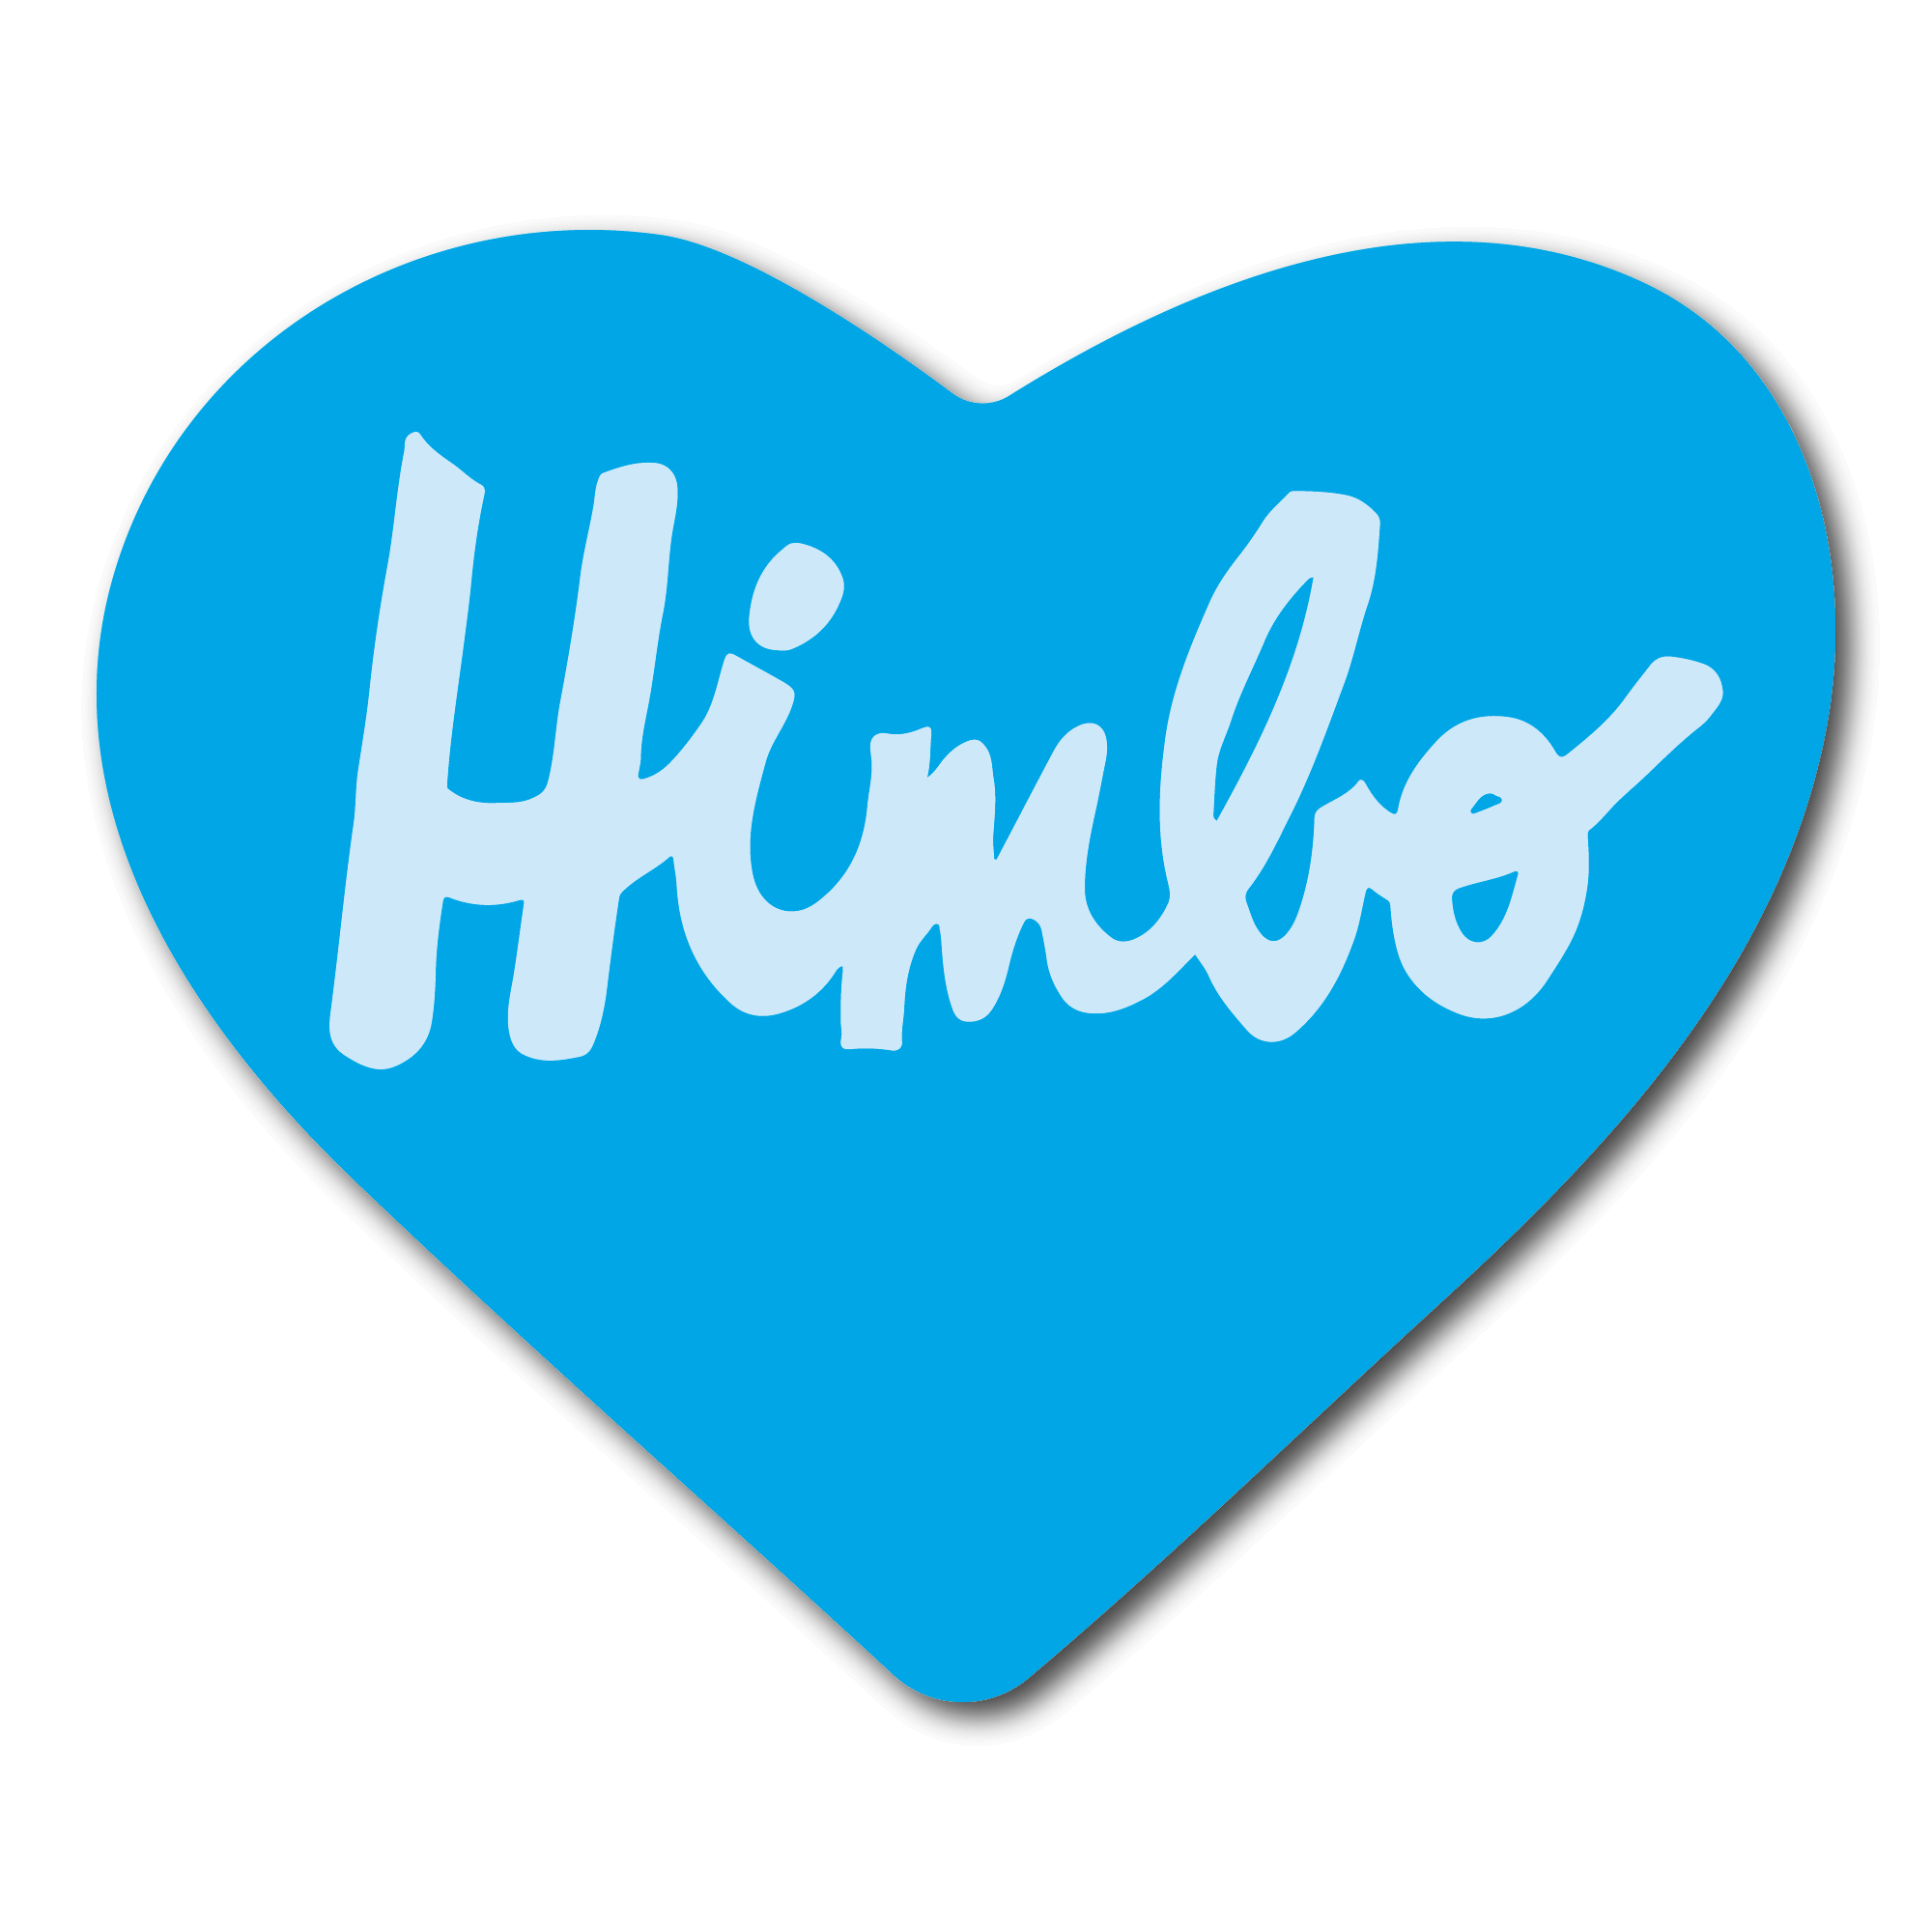 Small Blue Heart Sticker that says himbo